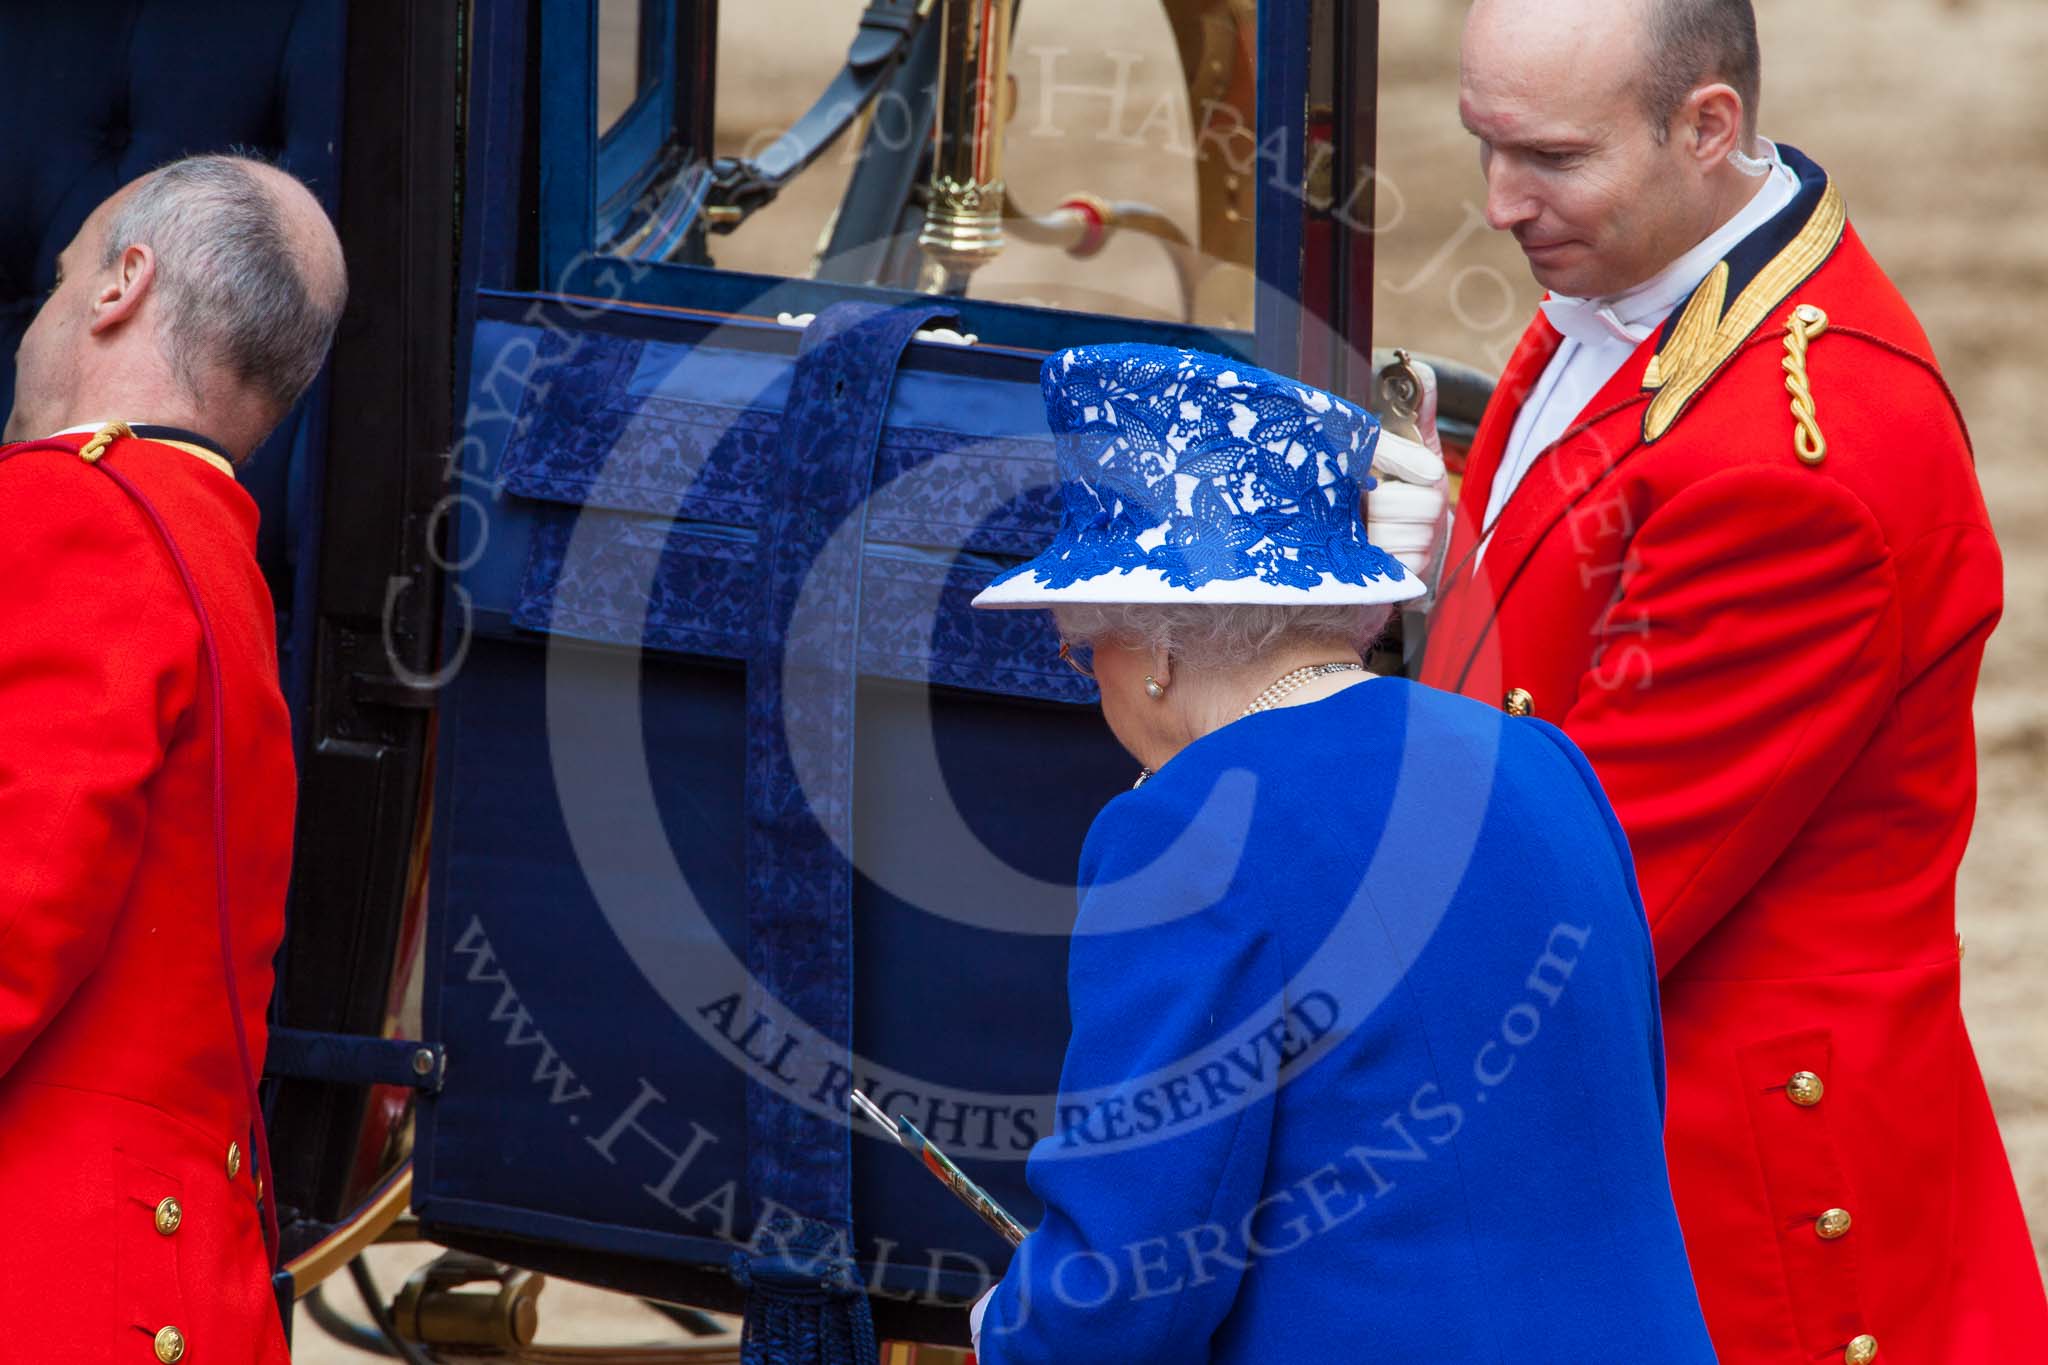 Trooping the Colour 2013: HM The Queen is about to board the glass coach for her journey back to Buckingham Palace. Image #805, 15 June 2013 12:09 Horse Guards Parade, London, UK